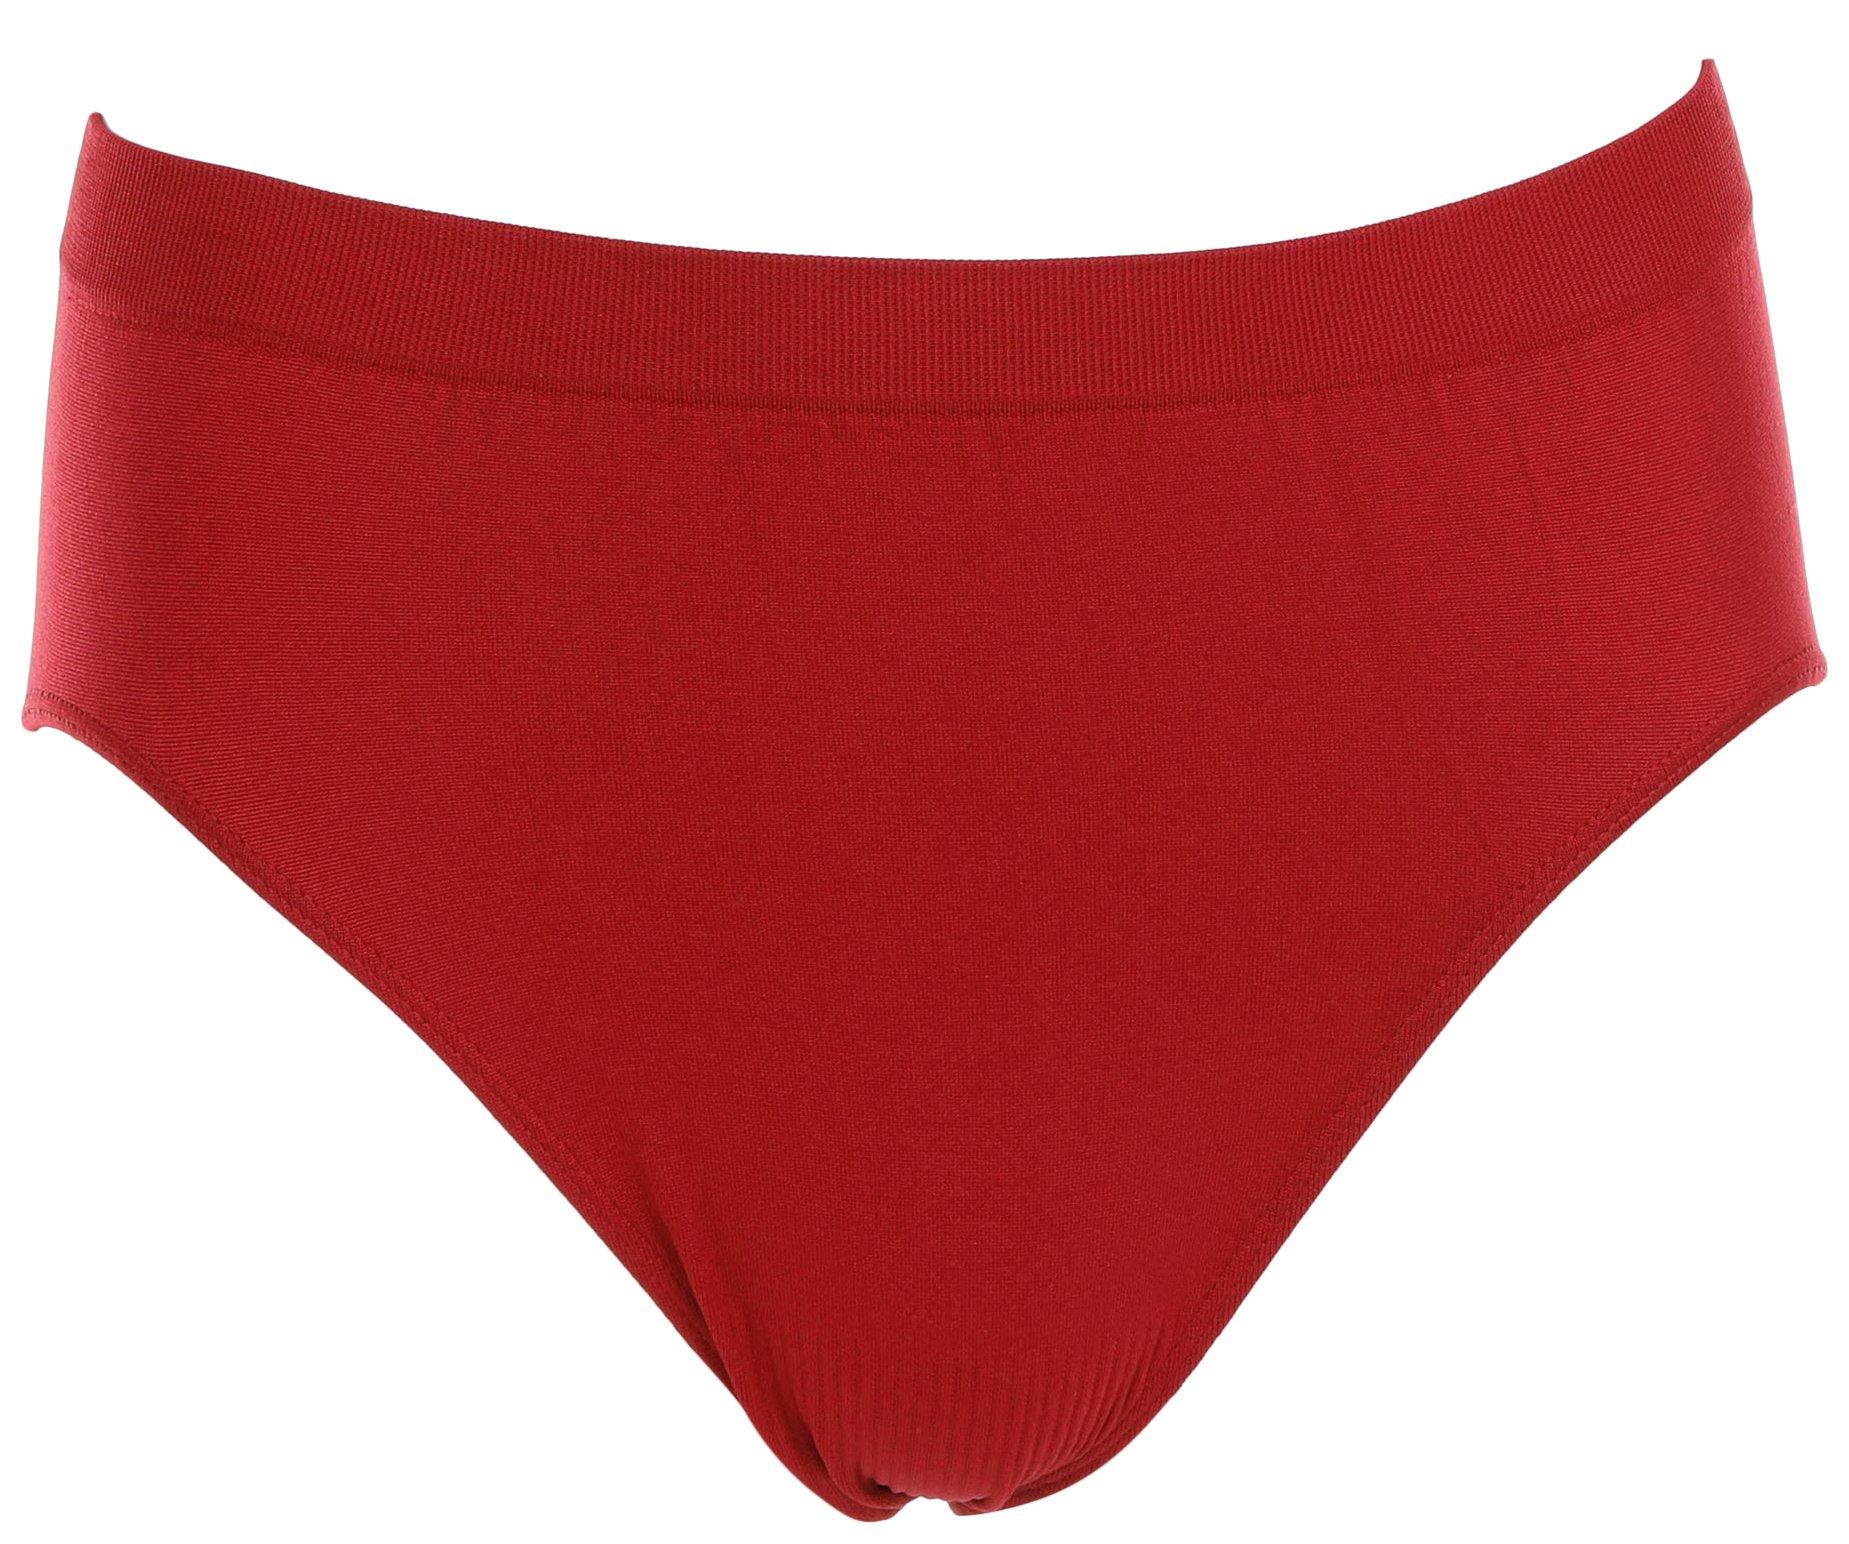 Jockey Women's Elance French Cut - 3 Pack 5 Red Reality/square Dot/mini  Candy Cane : Target